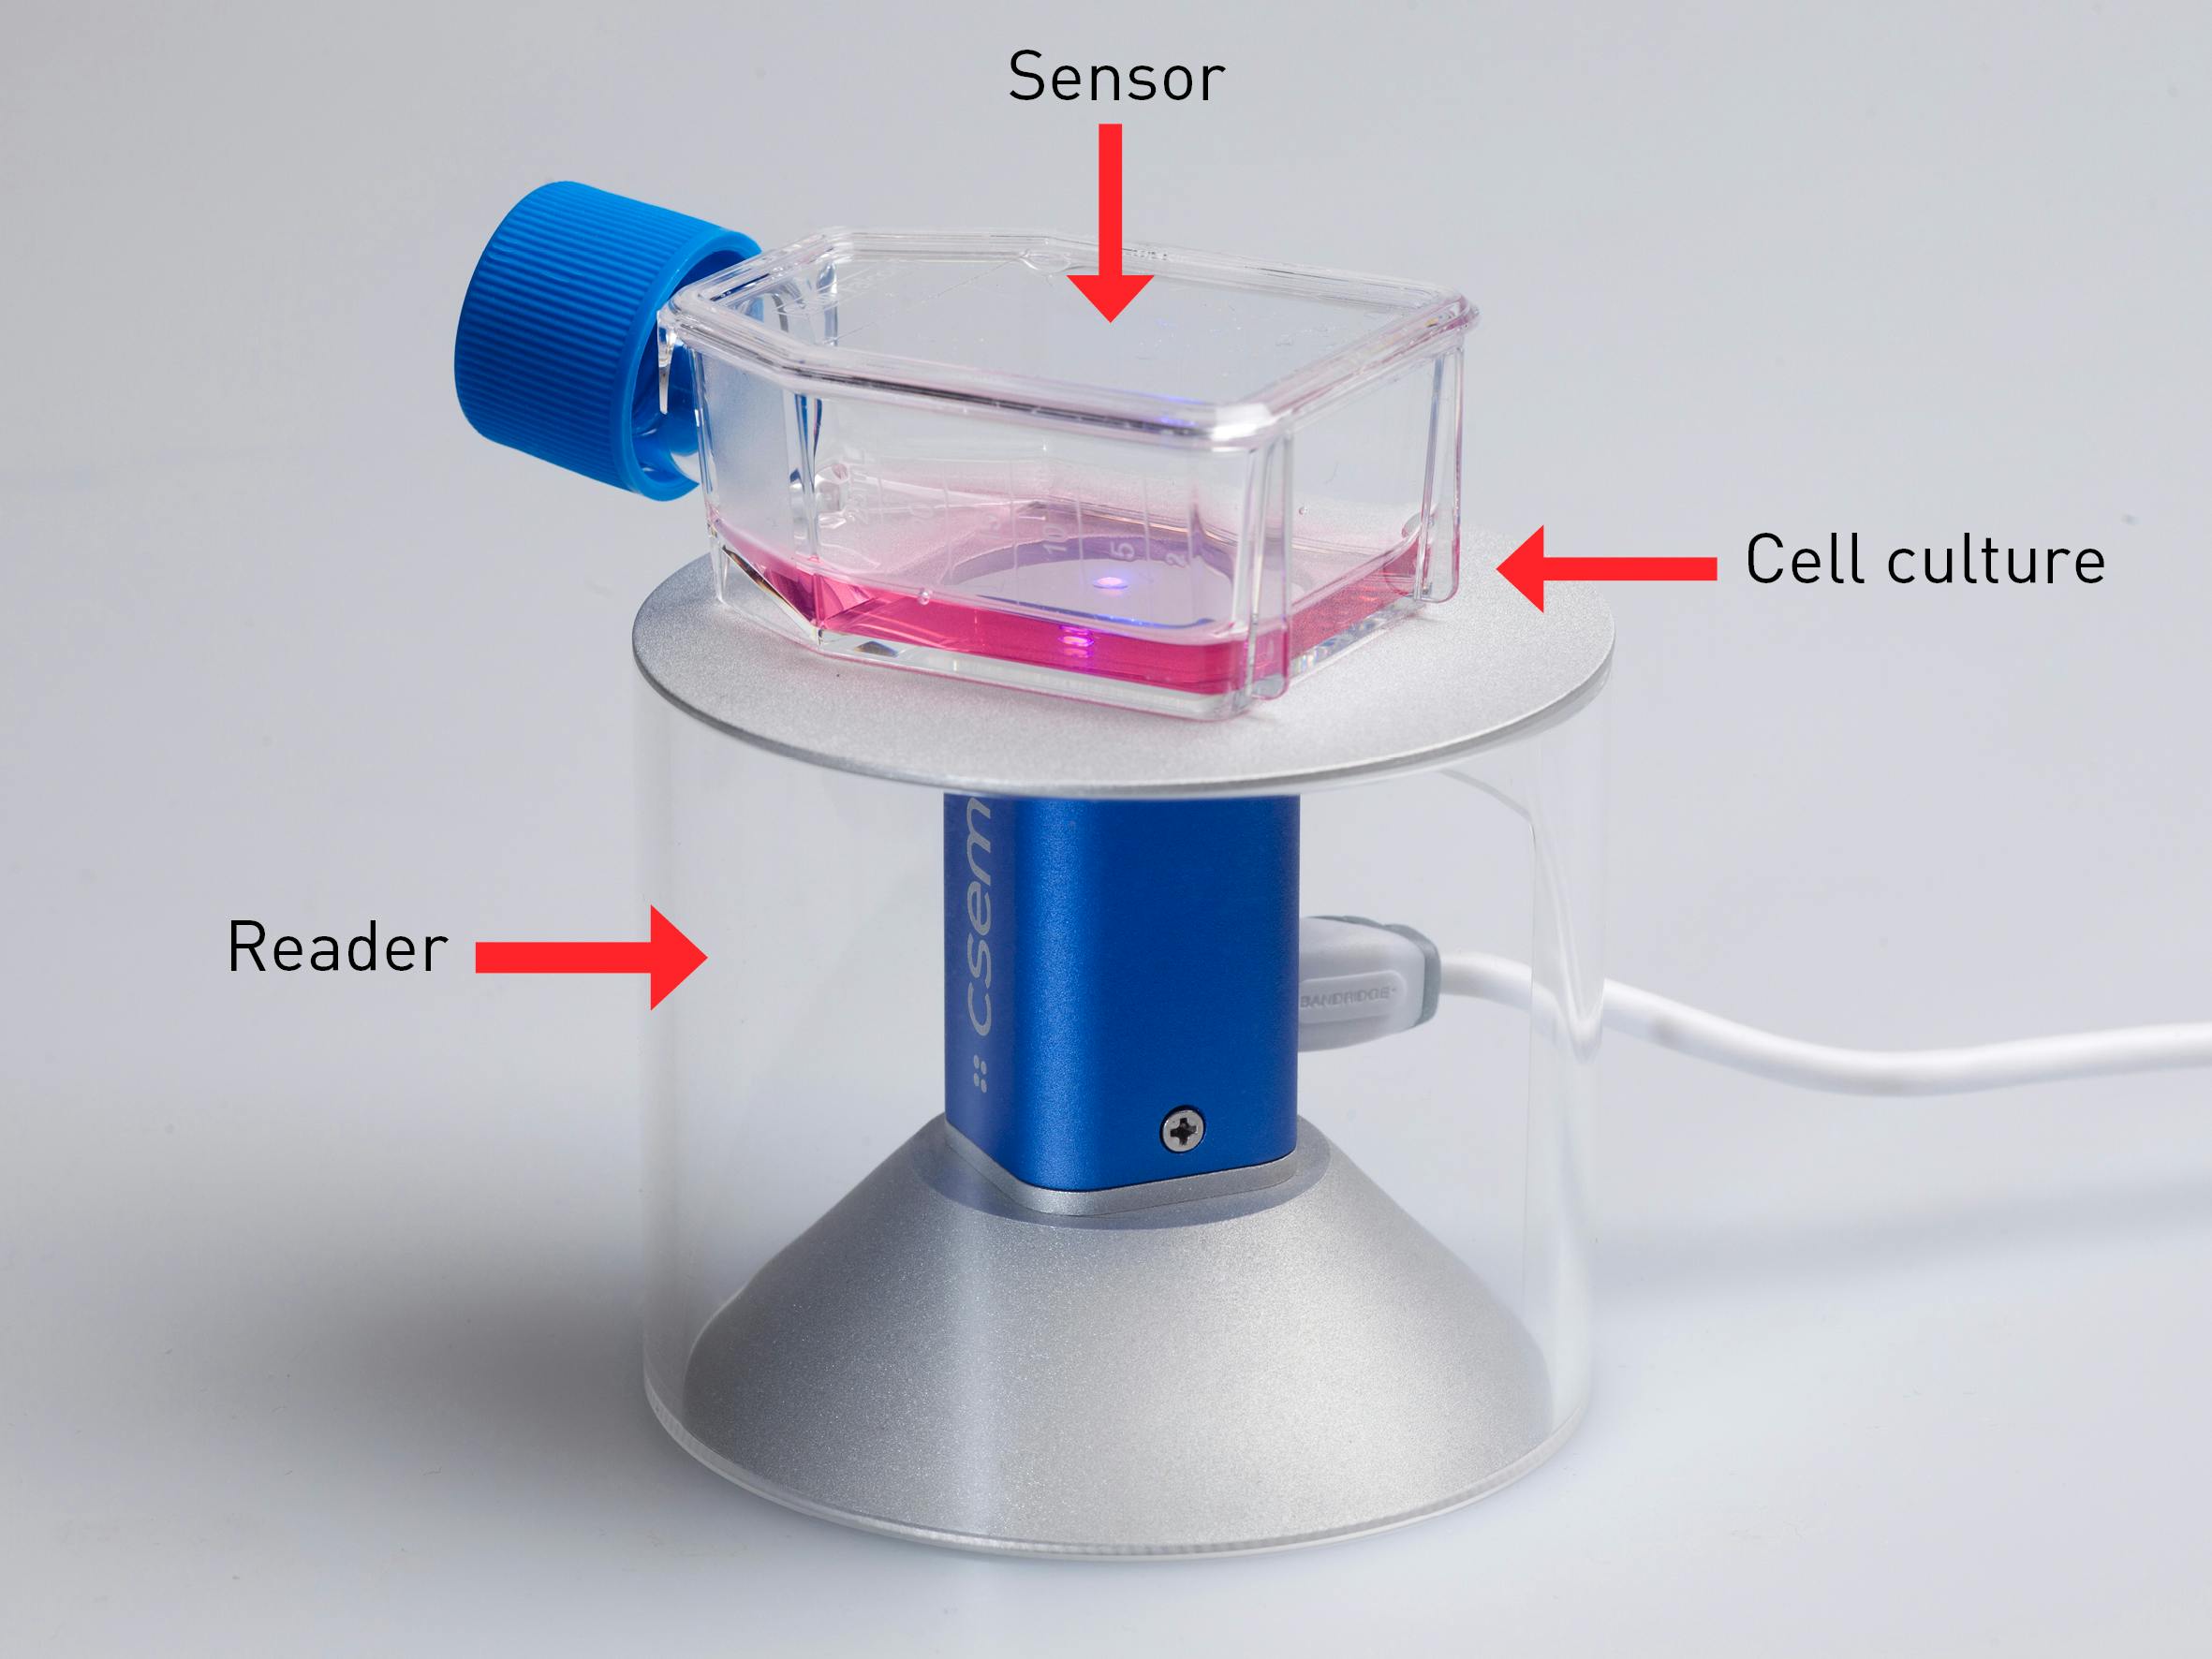 DEMOX reader equipped with fully integrated, miniaturized optics and electronics; and DEMOX sterile sensor for non-invasive, optical reading in a cell culture.